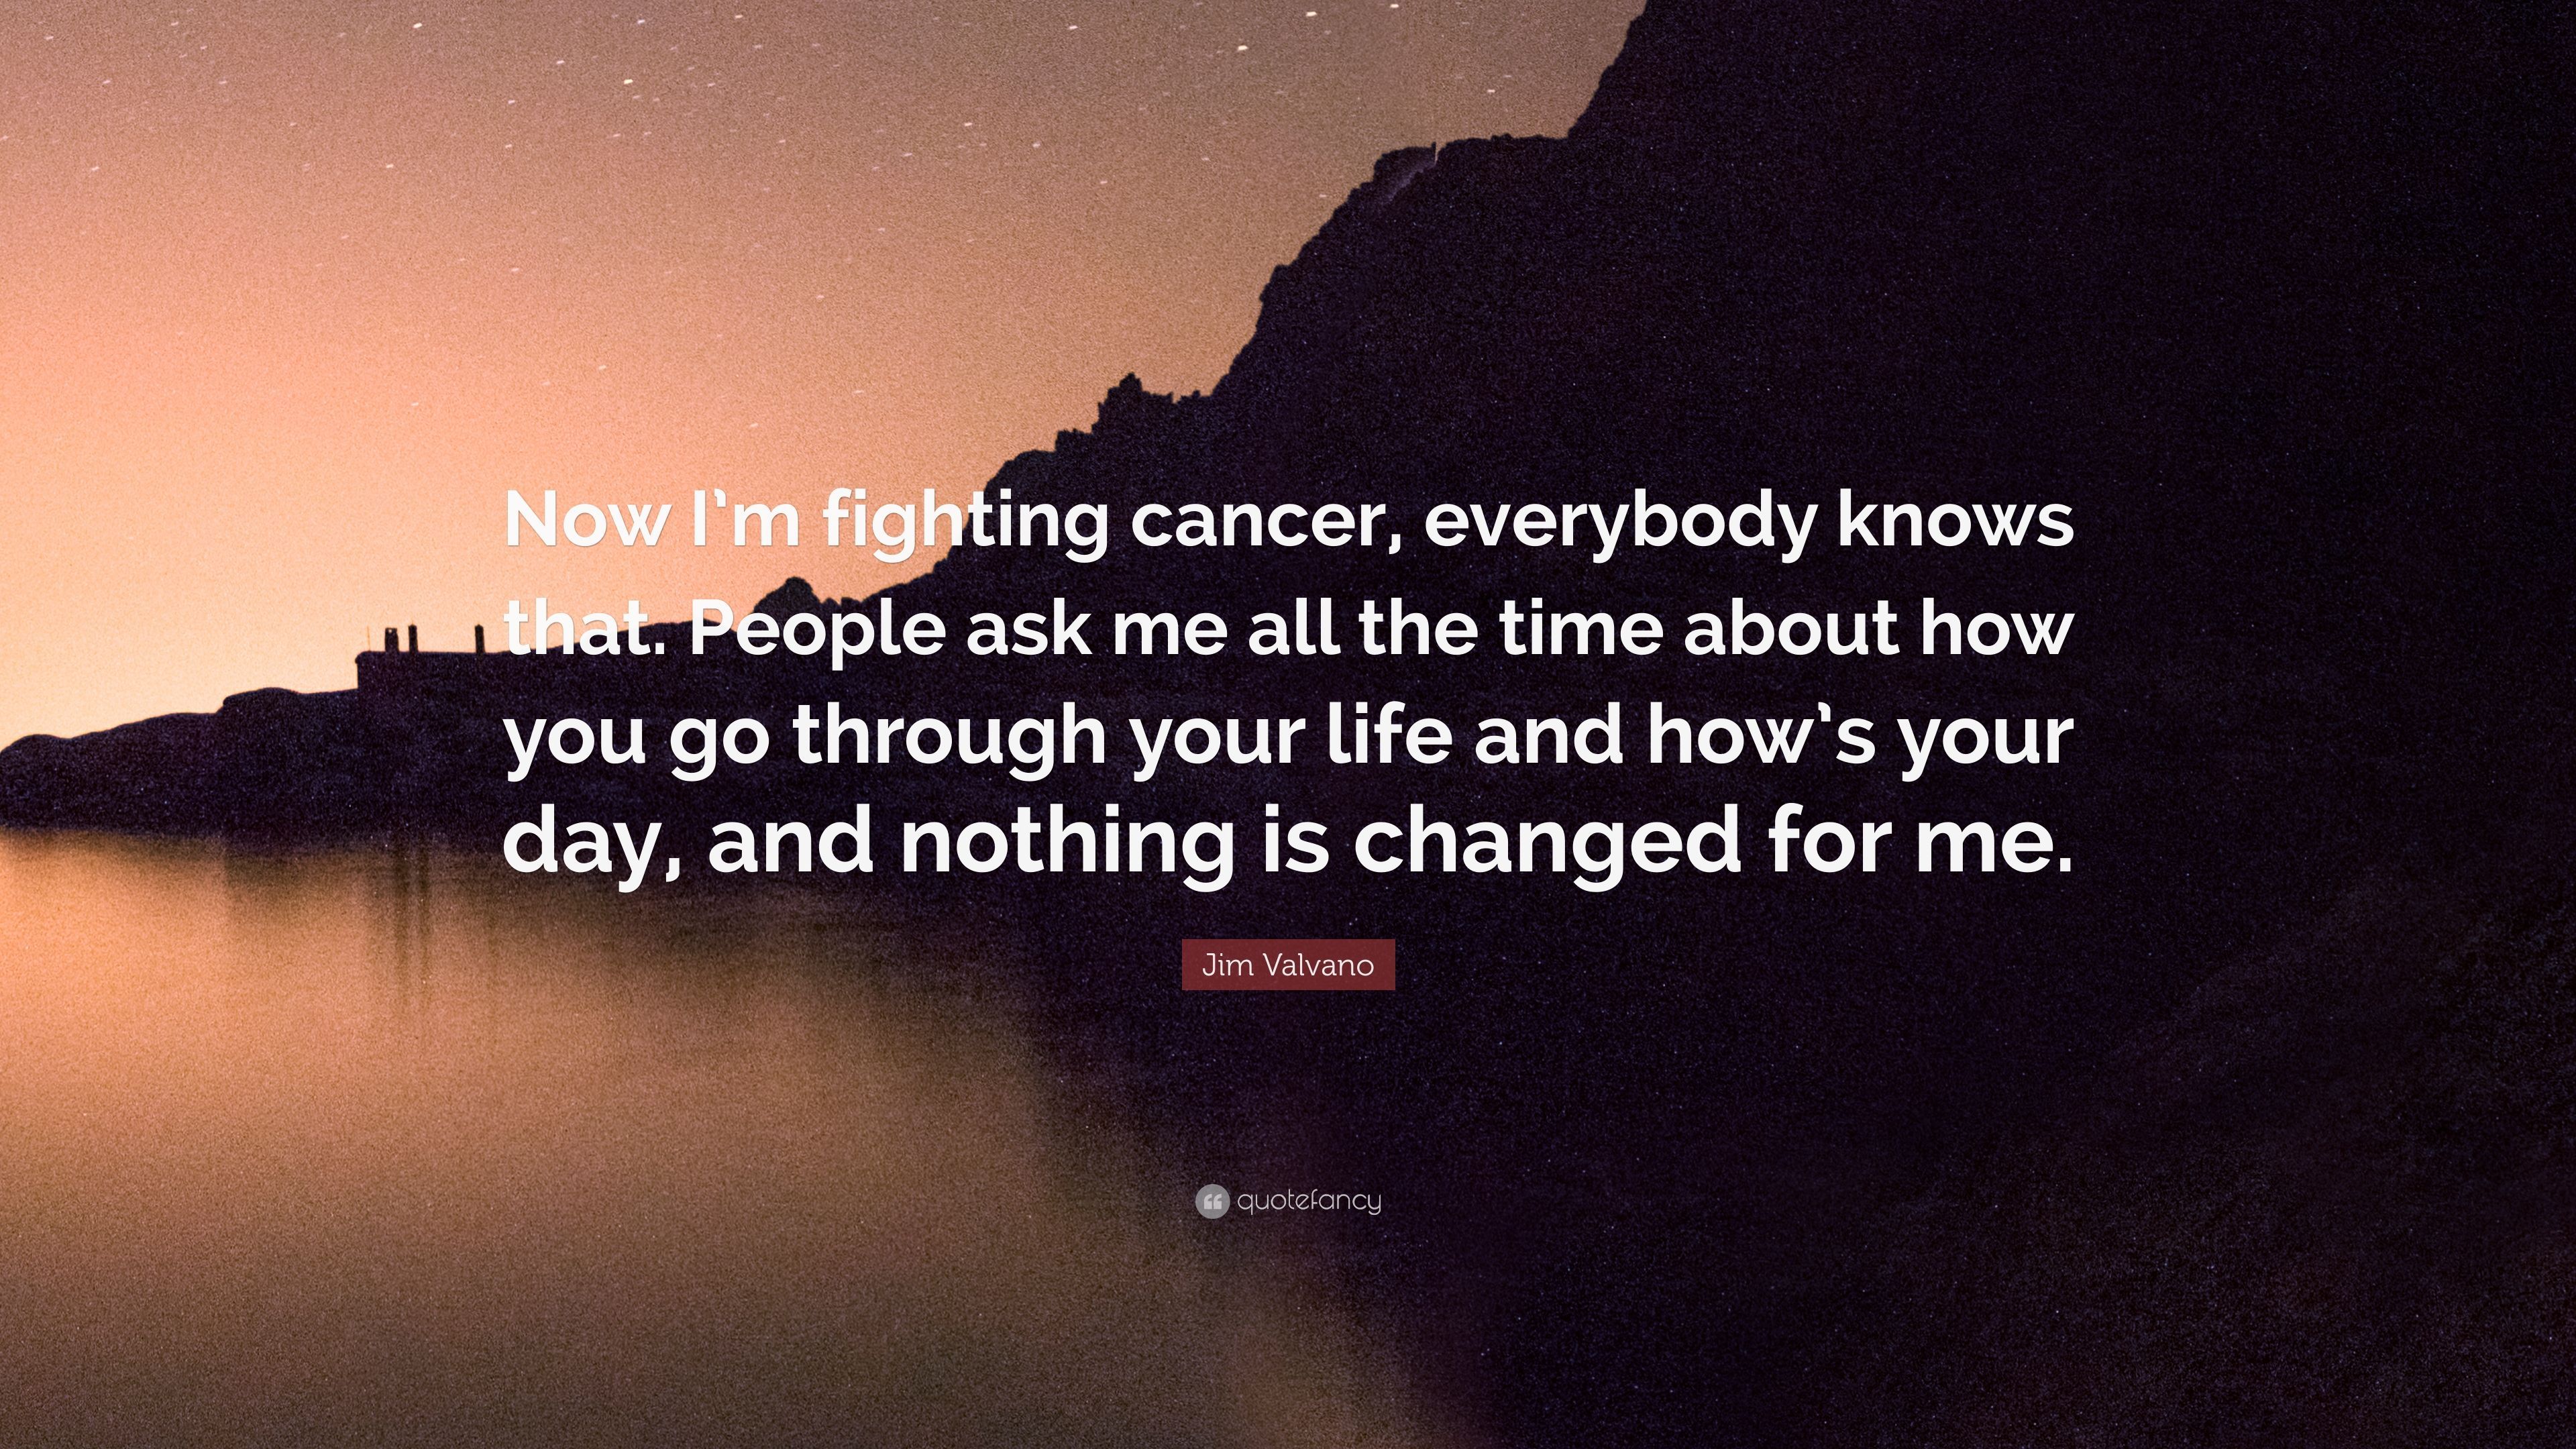 Jim Valvano Quote: “Now I'm fighting cancer, everybody knows that. People ask me all the time about how you go through your life and how's y.” (7 wallpaper)